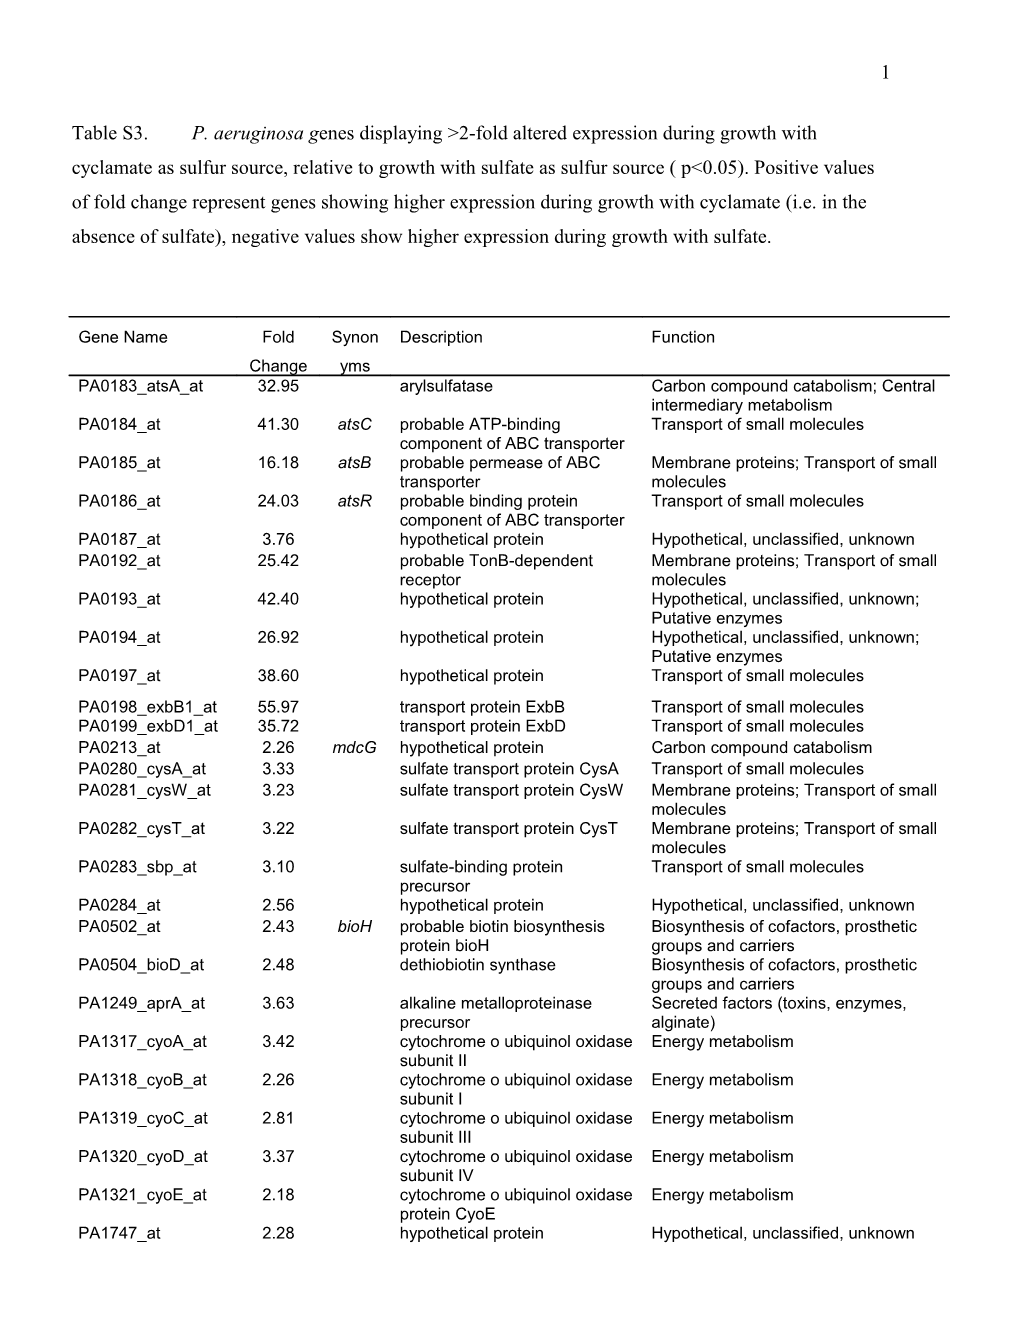 Table S3. P. Aeruginosa Genes Displaying &gt;2-Fold Altered Expression During Growth With